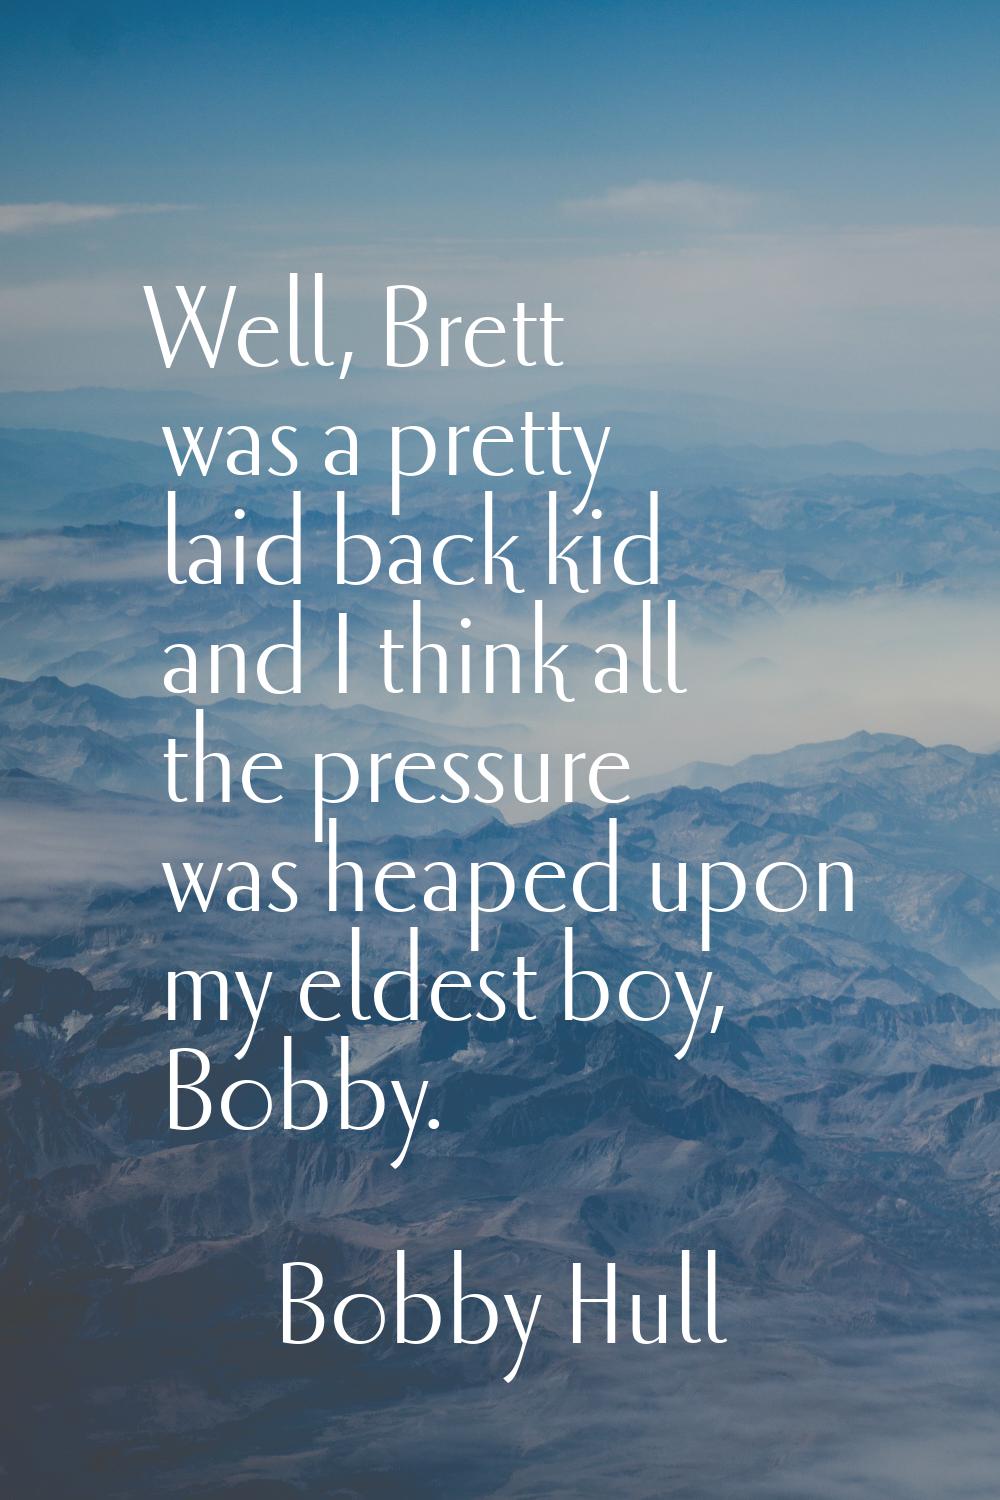 Well, Brett was a pretty laid back kid and I think all the pressure was heaped upon my eldest boy, 